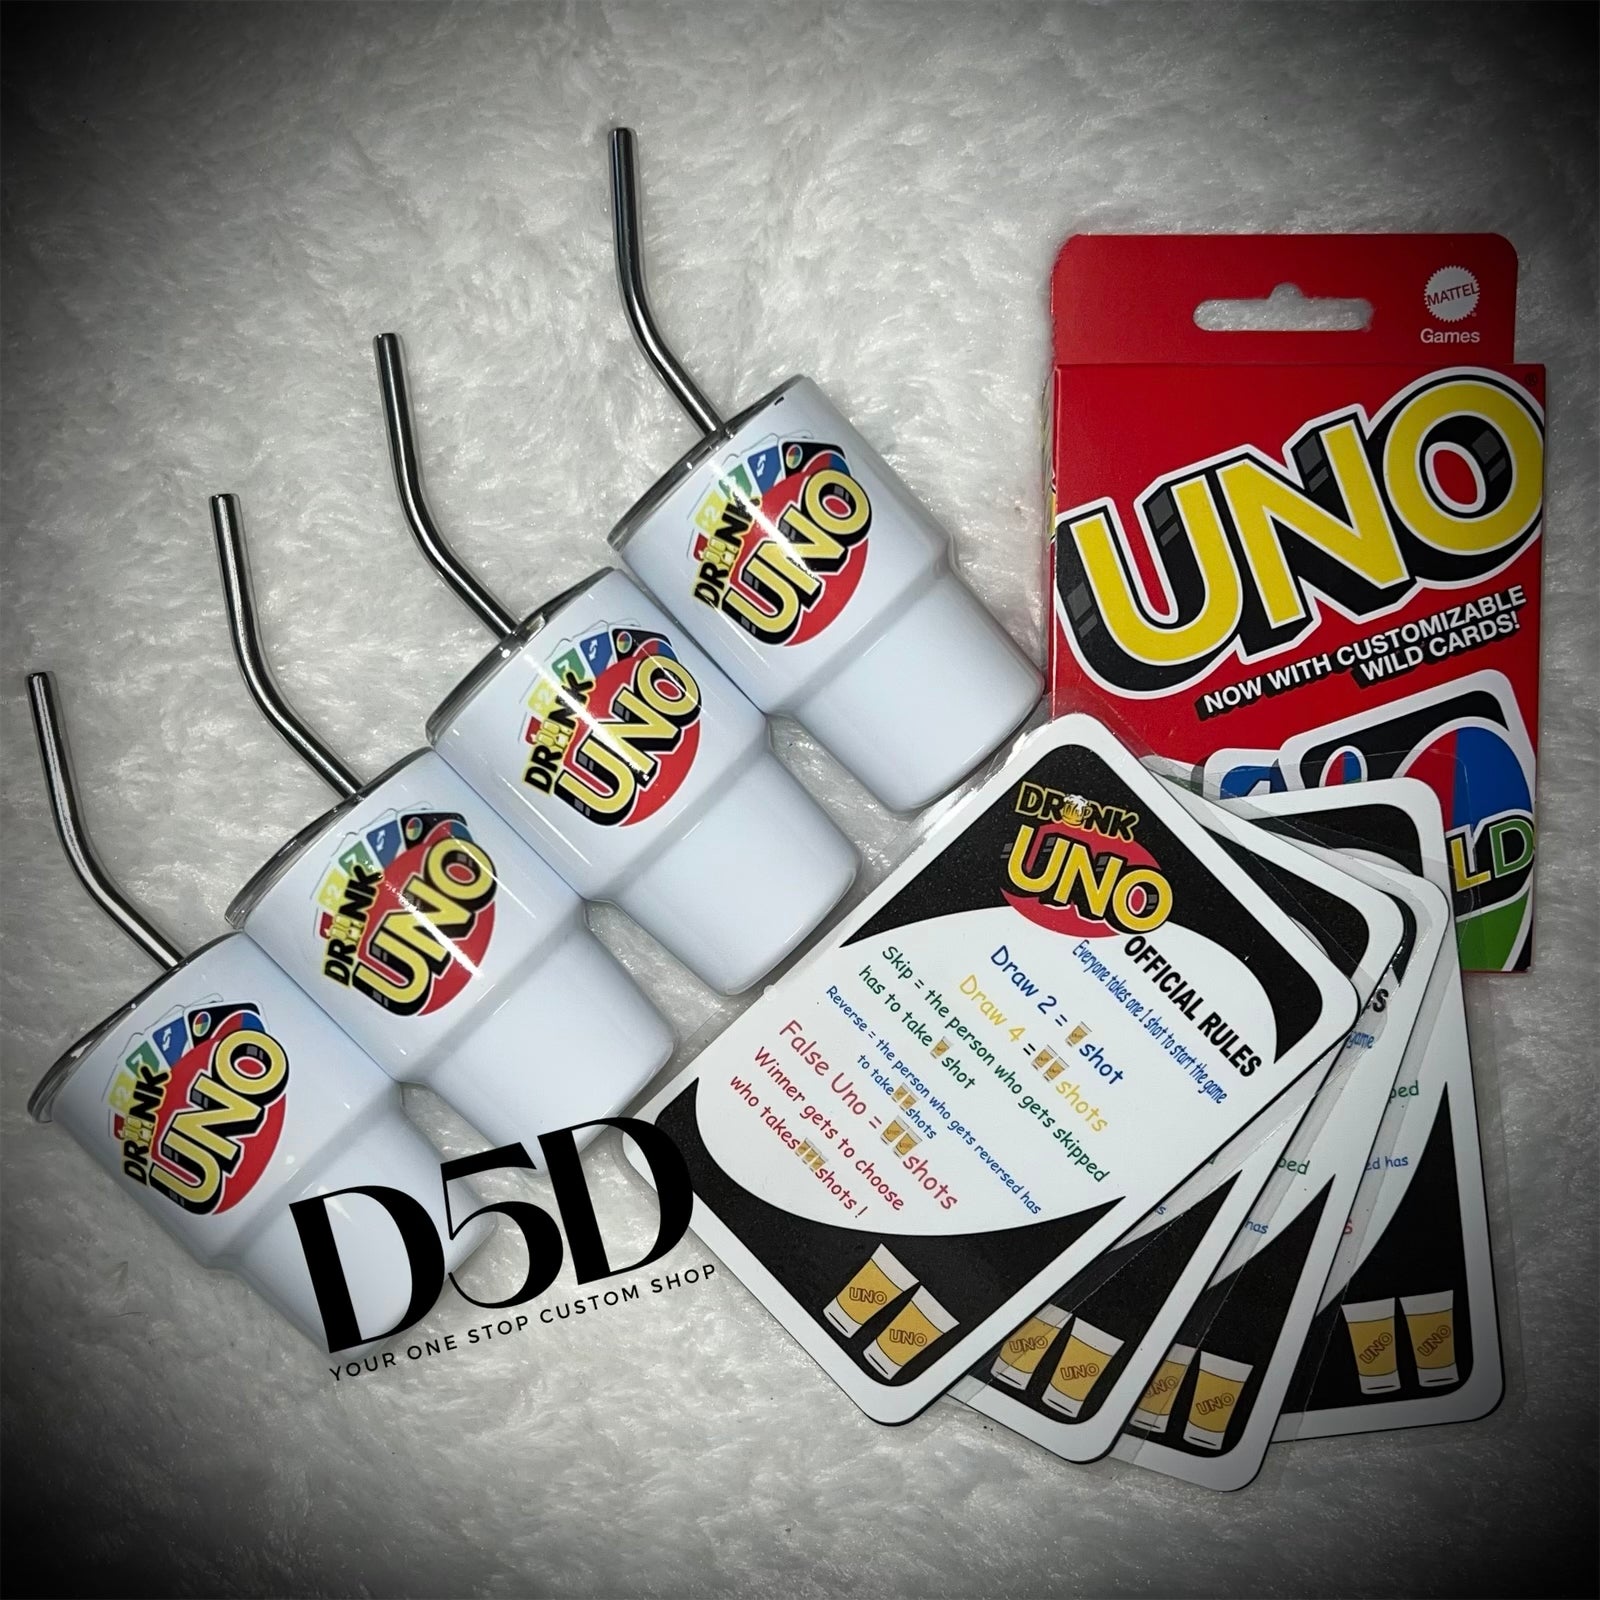 This Drunk UNO Game Requires Everyone to Take Shots